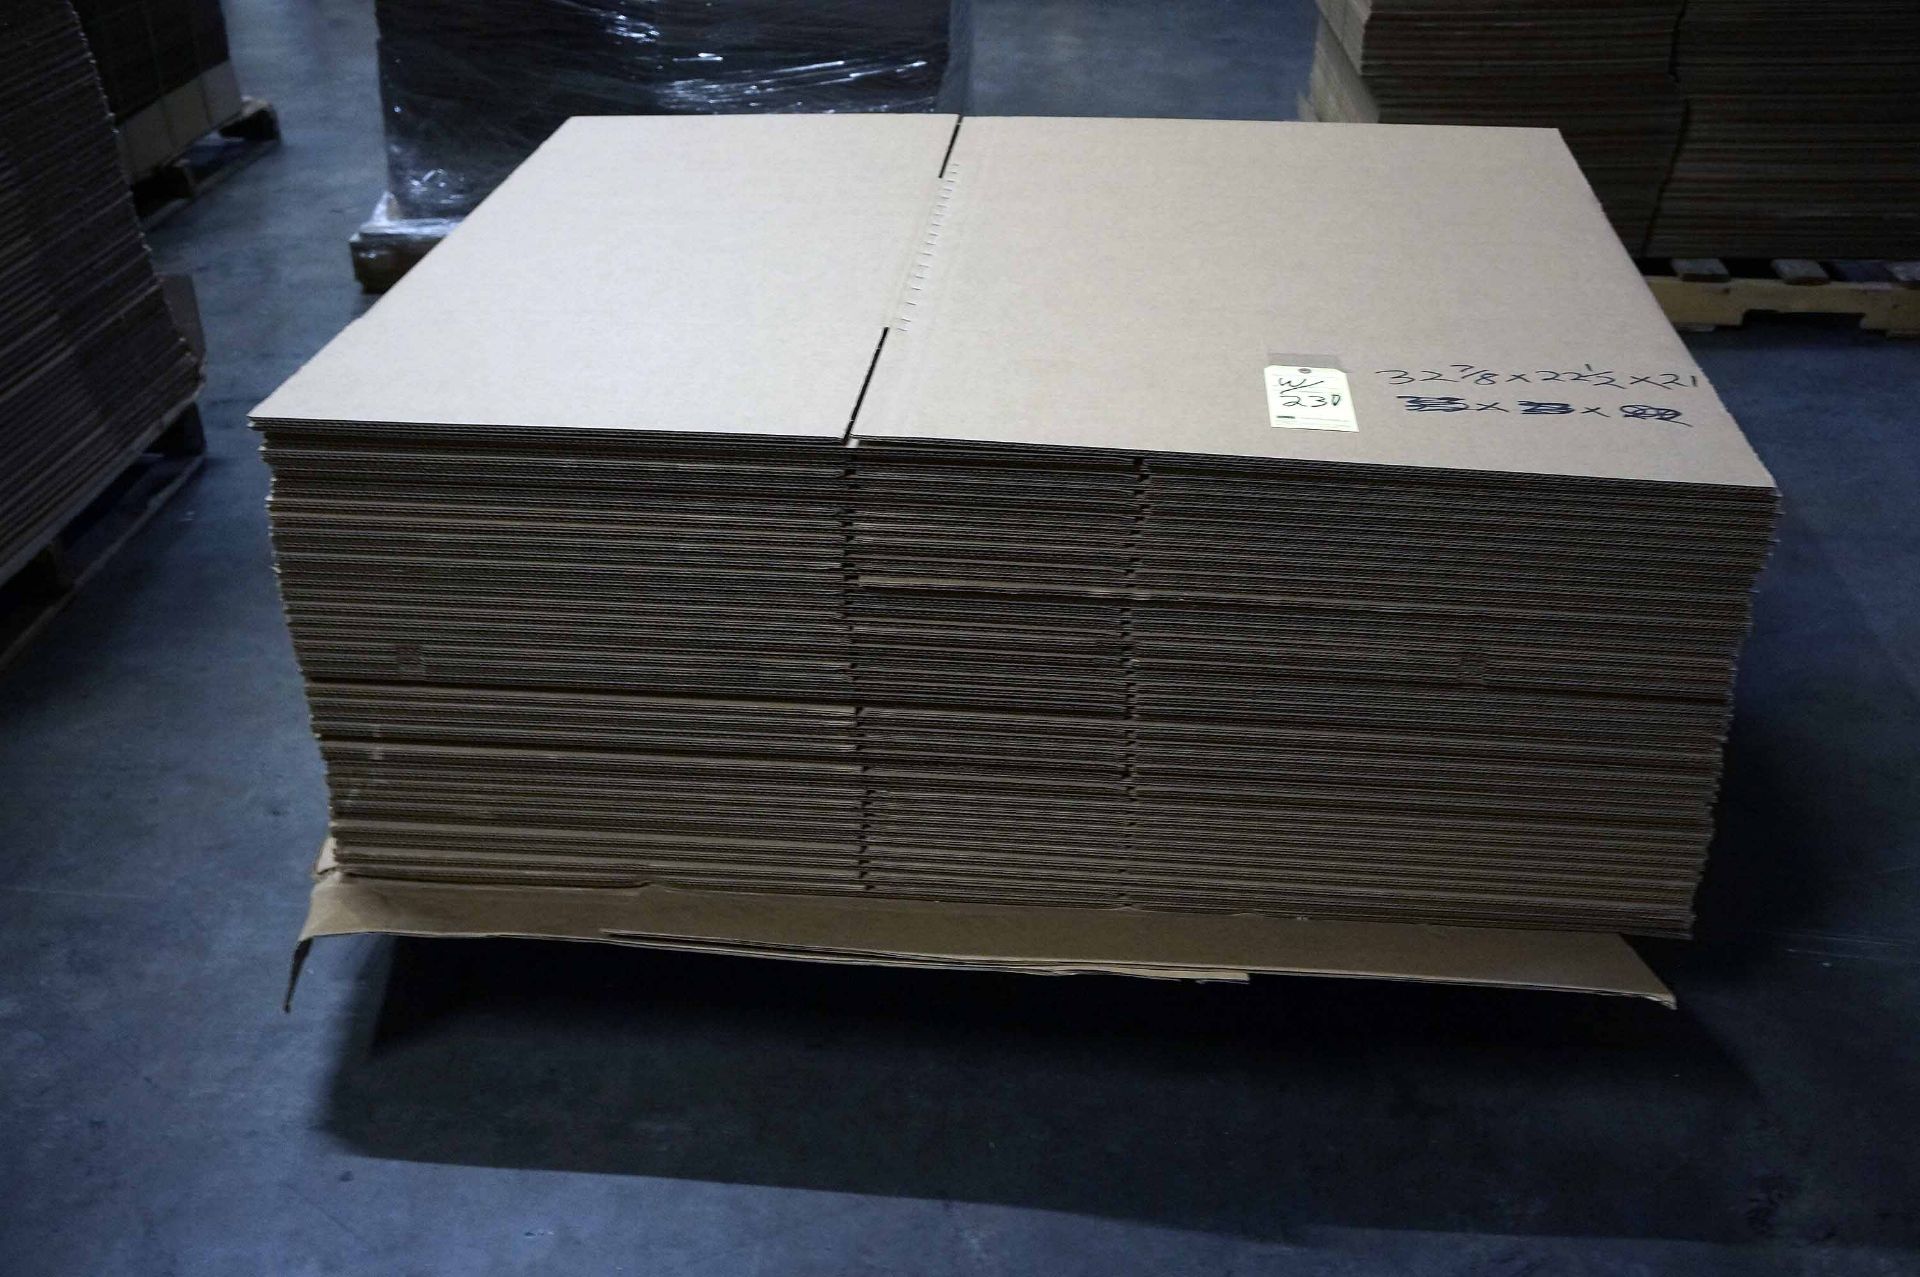 LOT OF CARDBOARD BOXES: 32-7/8" x 22-1/2" x 7-1/4" (one pallet), 20" x 10-1/4" x 5" (one pallet), - Image 6 of 8